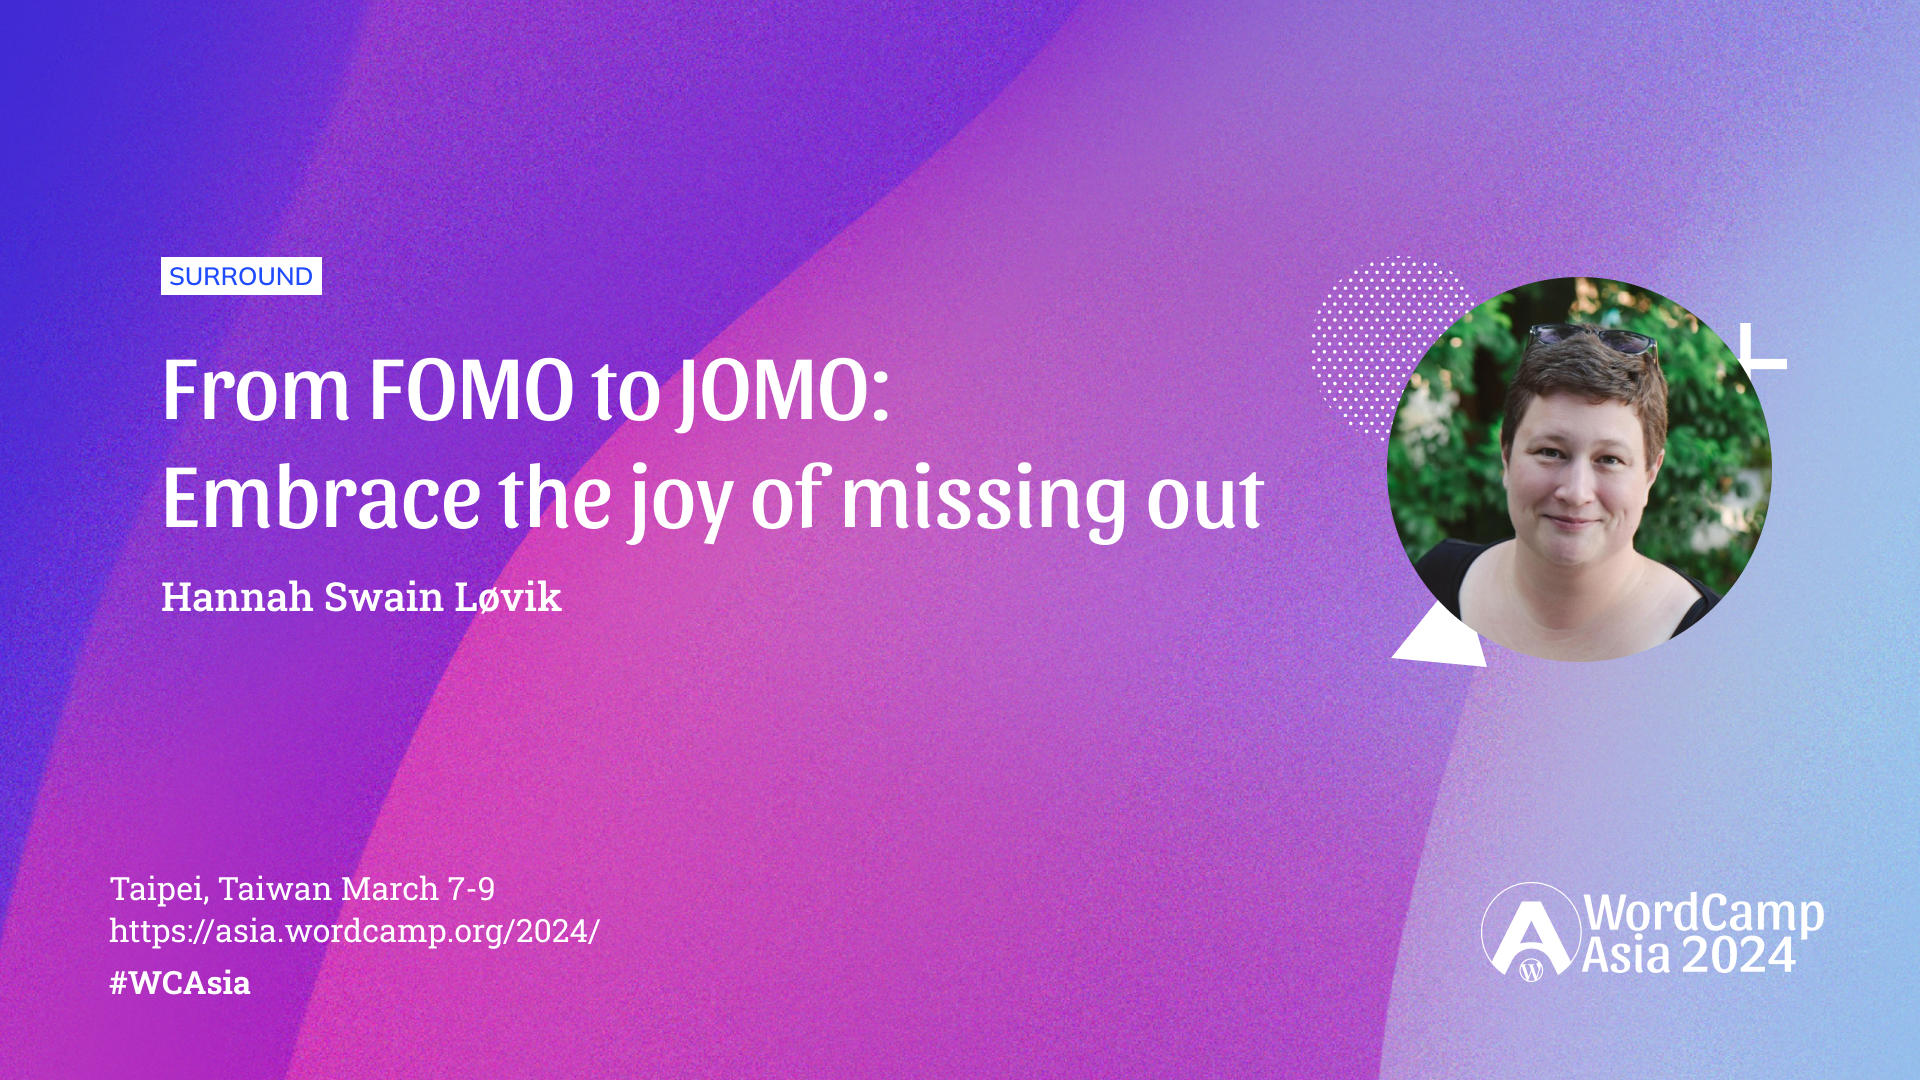 From FOMO to JOMO: Embrace the joy of missing out